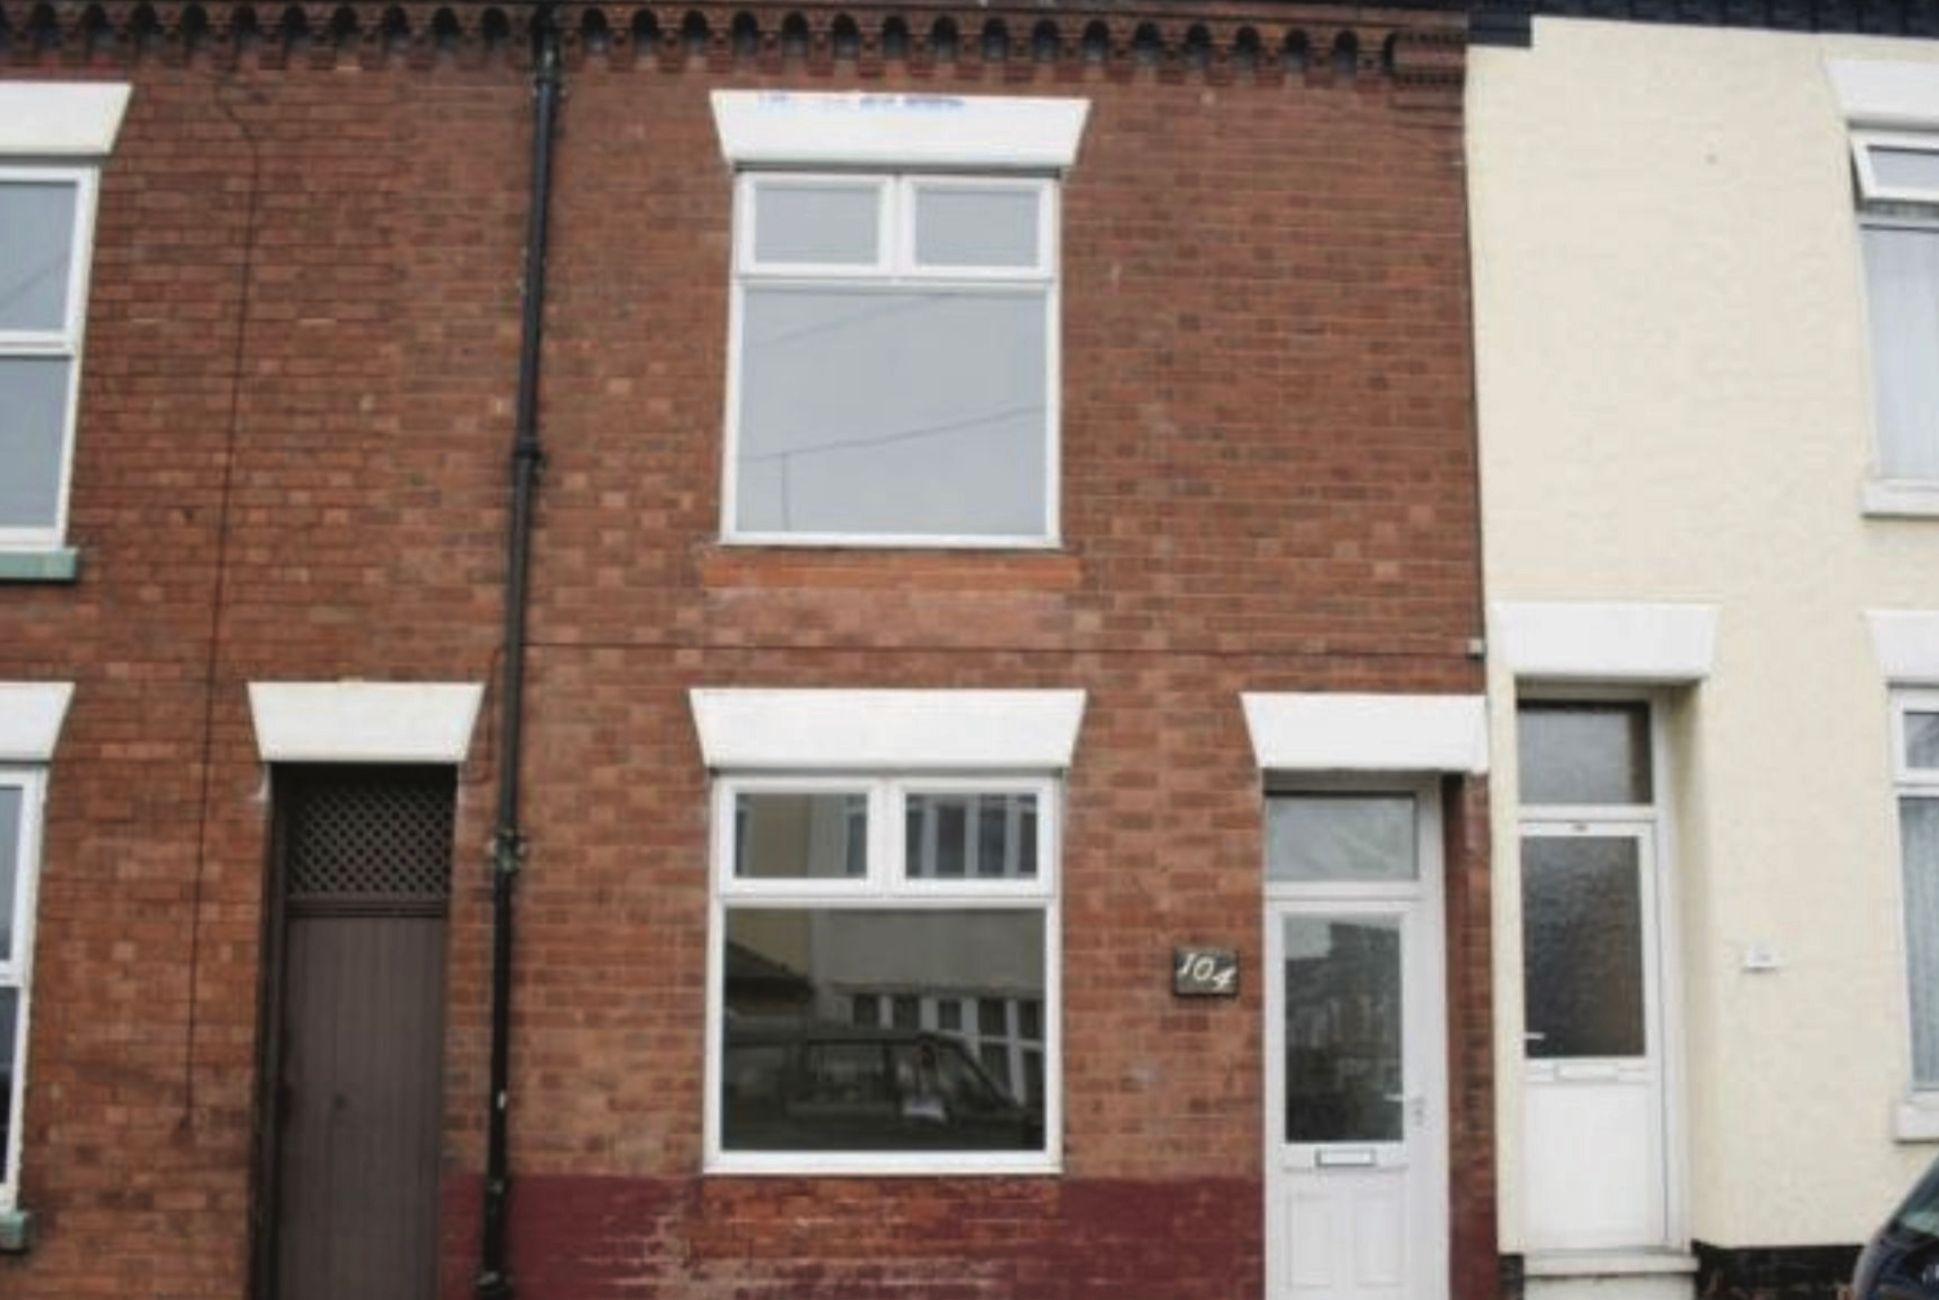 Off Market, Below Market Value, Buy To Let in Leicester